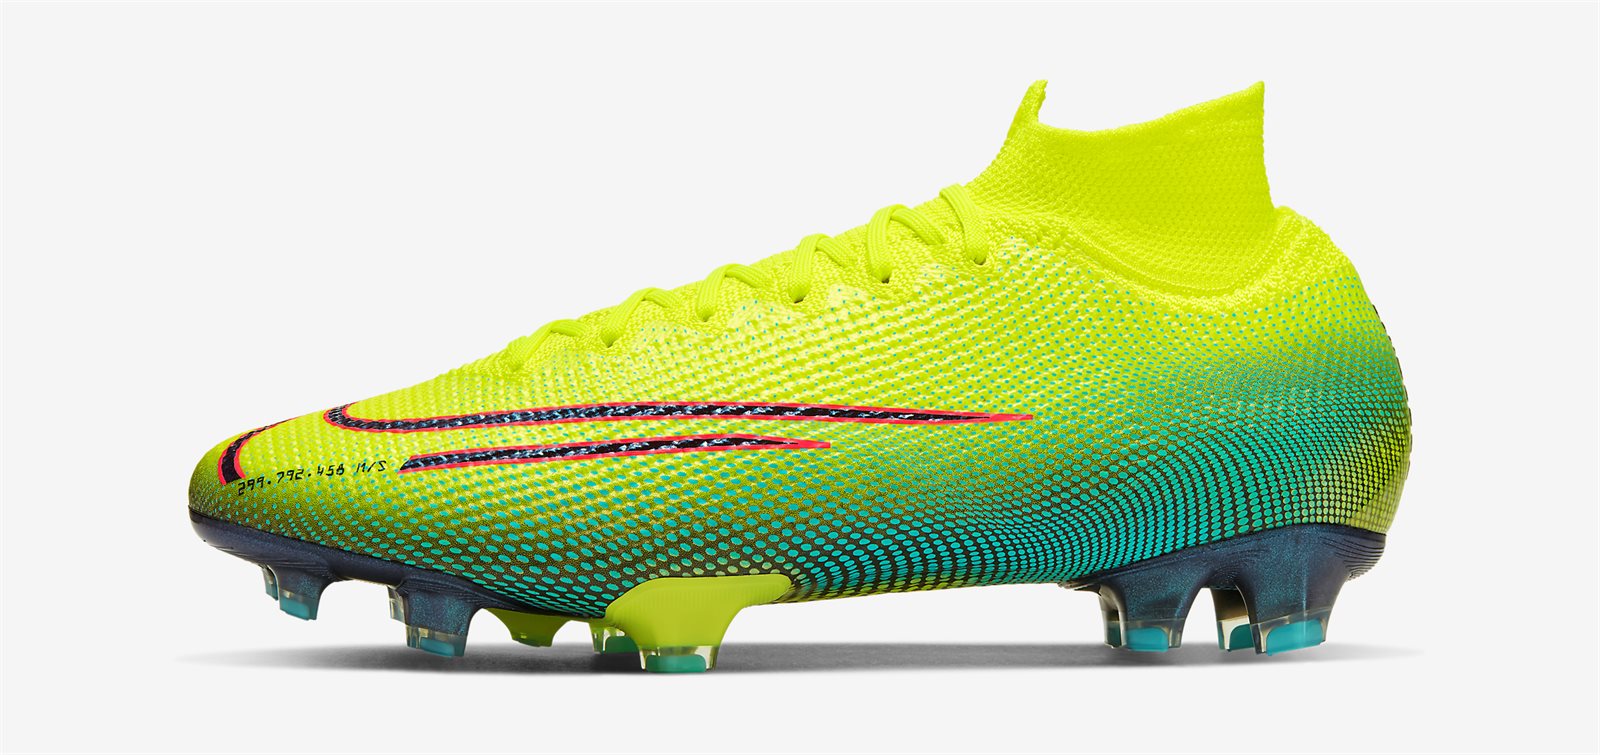 cr7 boots 2019